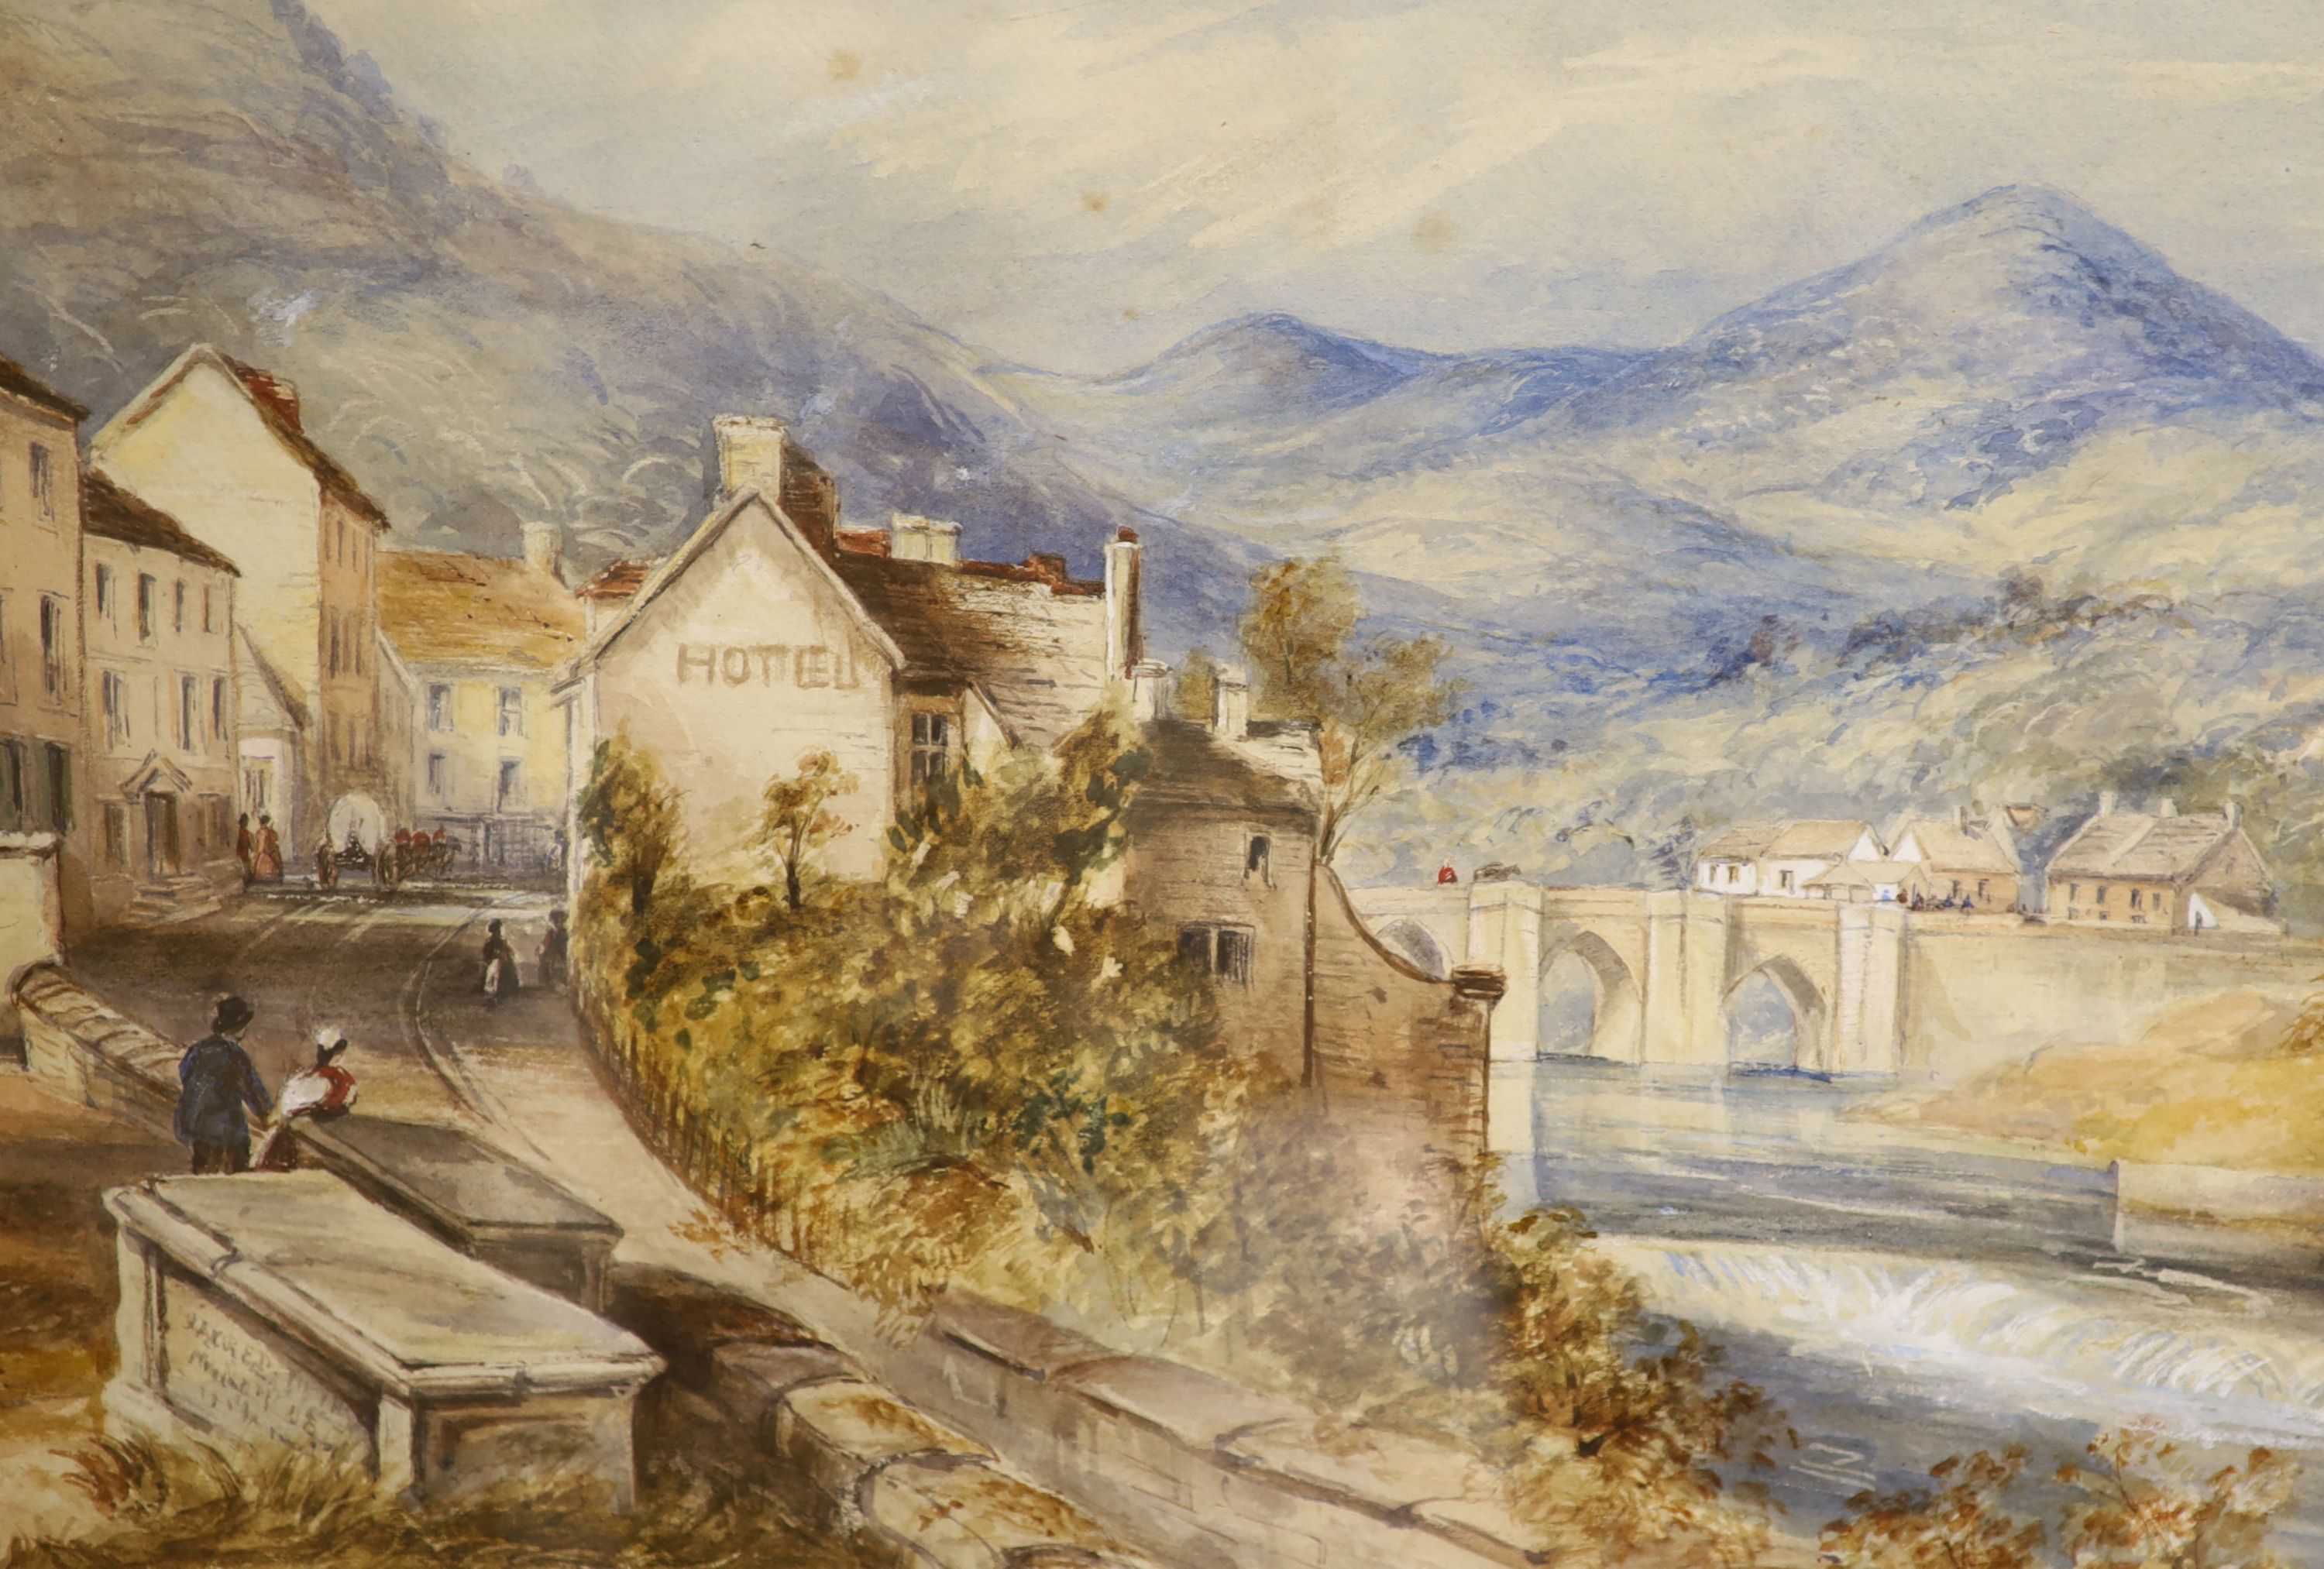 A.M. 19th century, watercolour, The Glen, monogrammed and dated 1863, 31 x 45cm